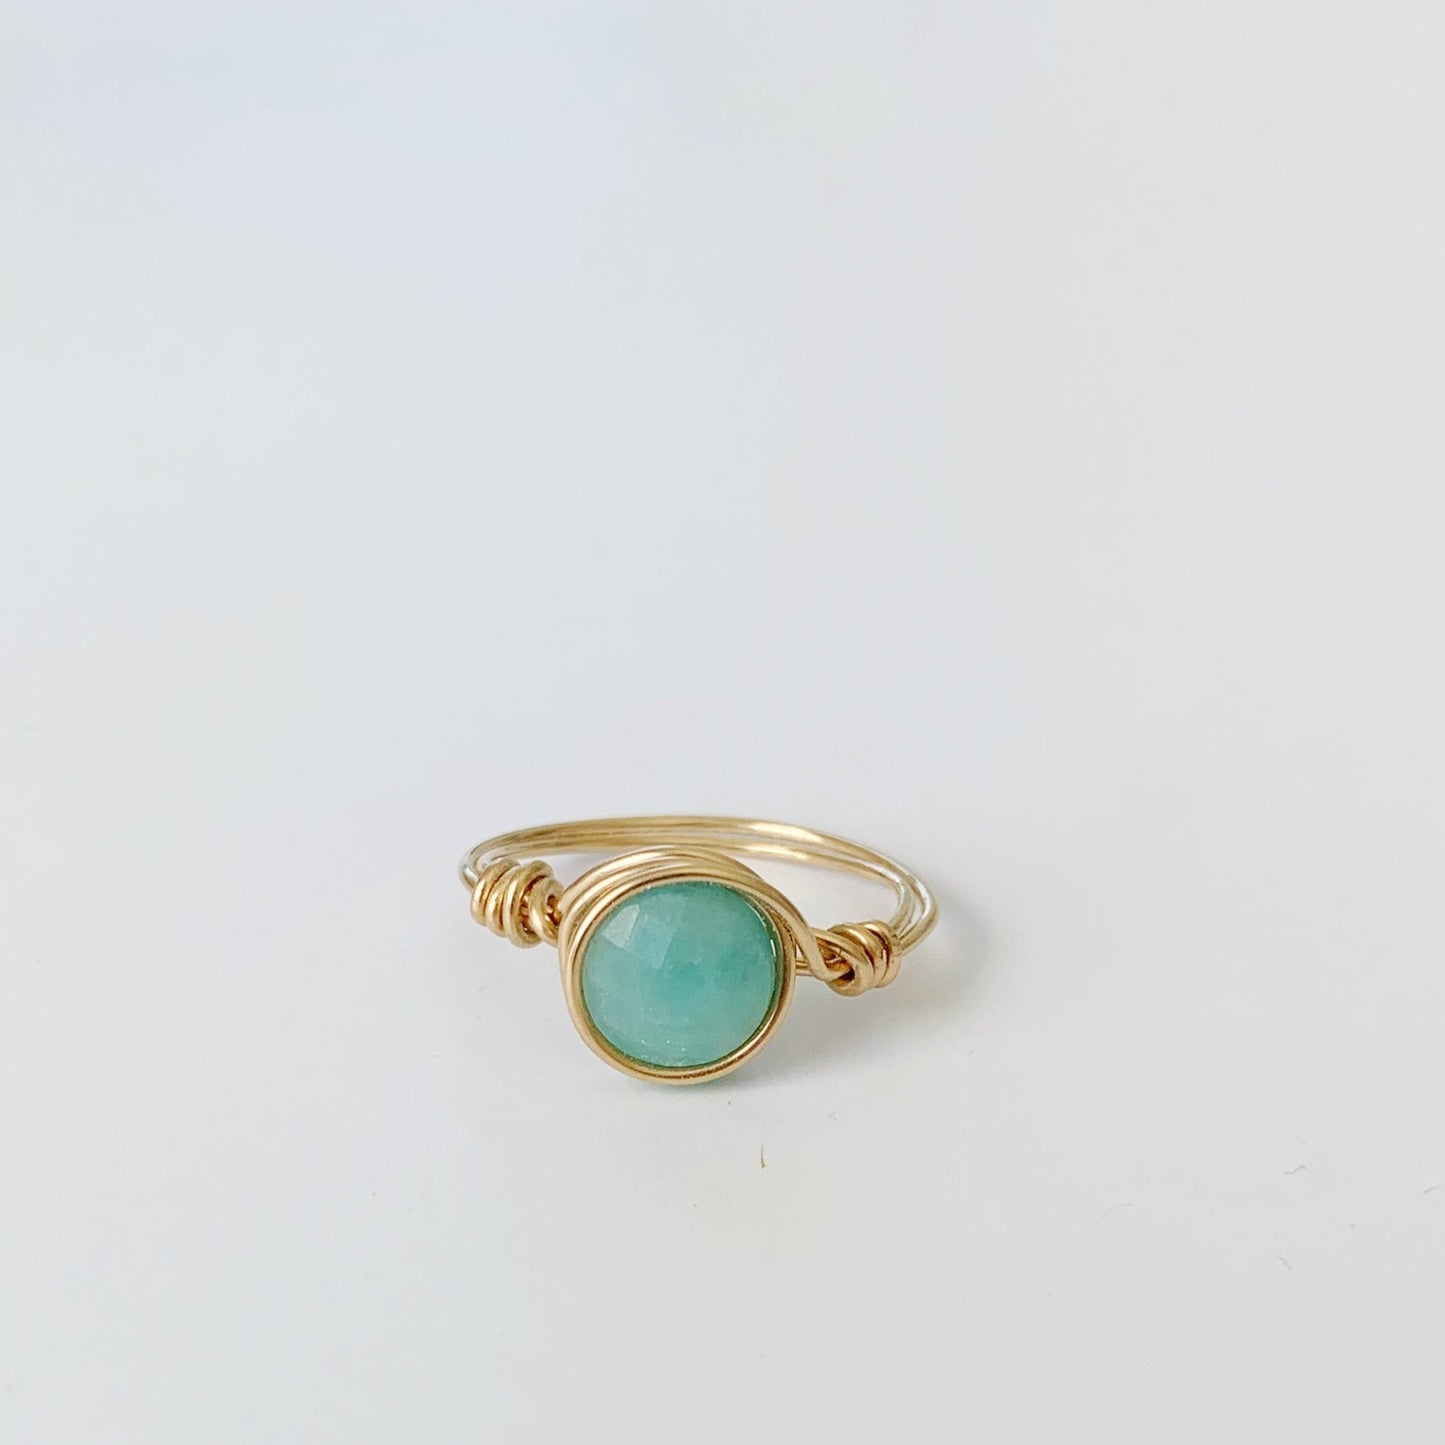 Mermaids and Madeleines Captiva Wire Wrapped ring in 14k gold filled wire with a bright amazonite gem. This ring is photographed on a white surface